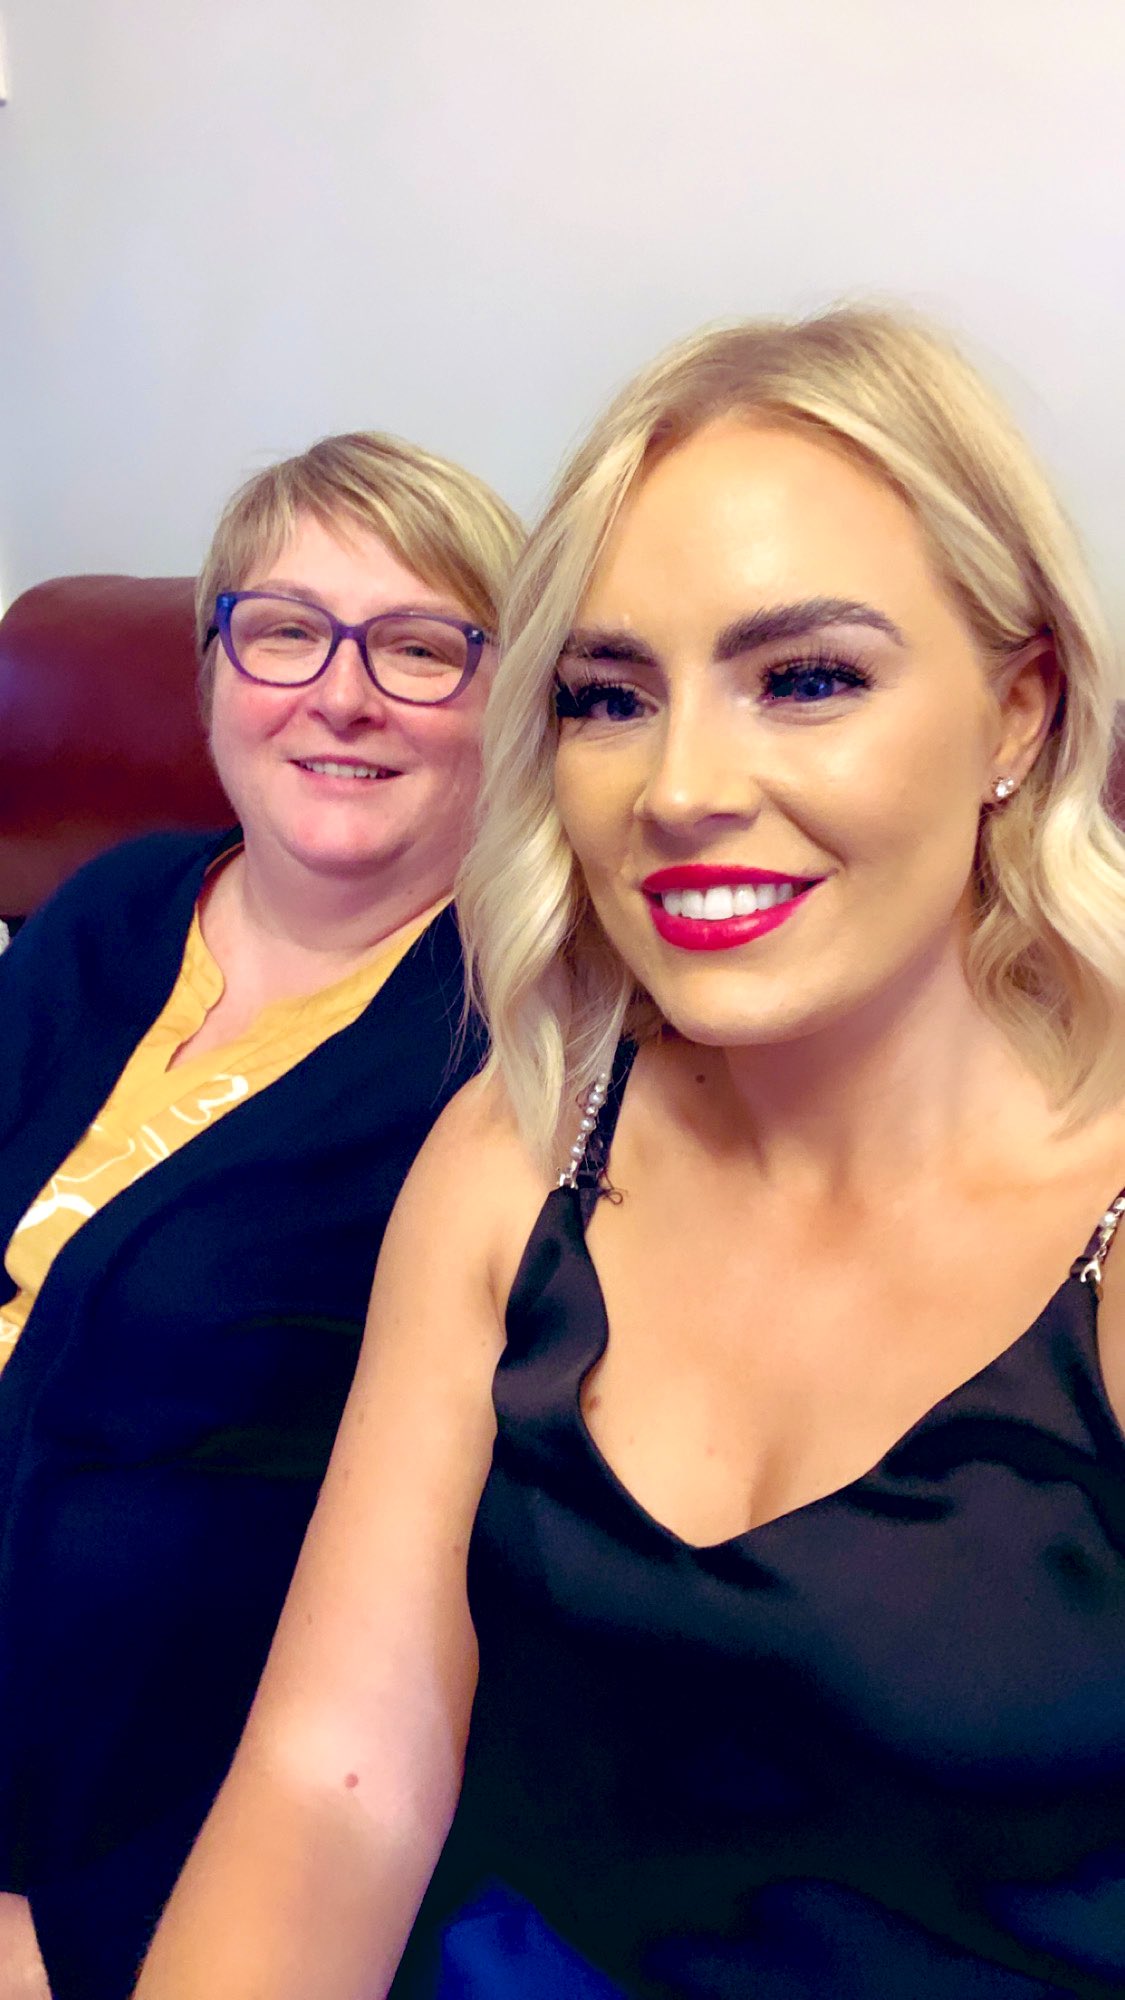 Dr Patricia O'Lynn on X: Not the usual polling day for me and mum this  year but we took our obligatory Mother-Daughter photo as she's still my  biggest supporter and will be